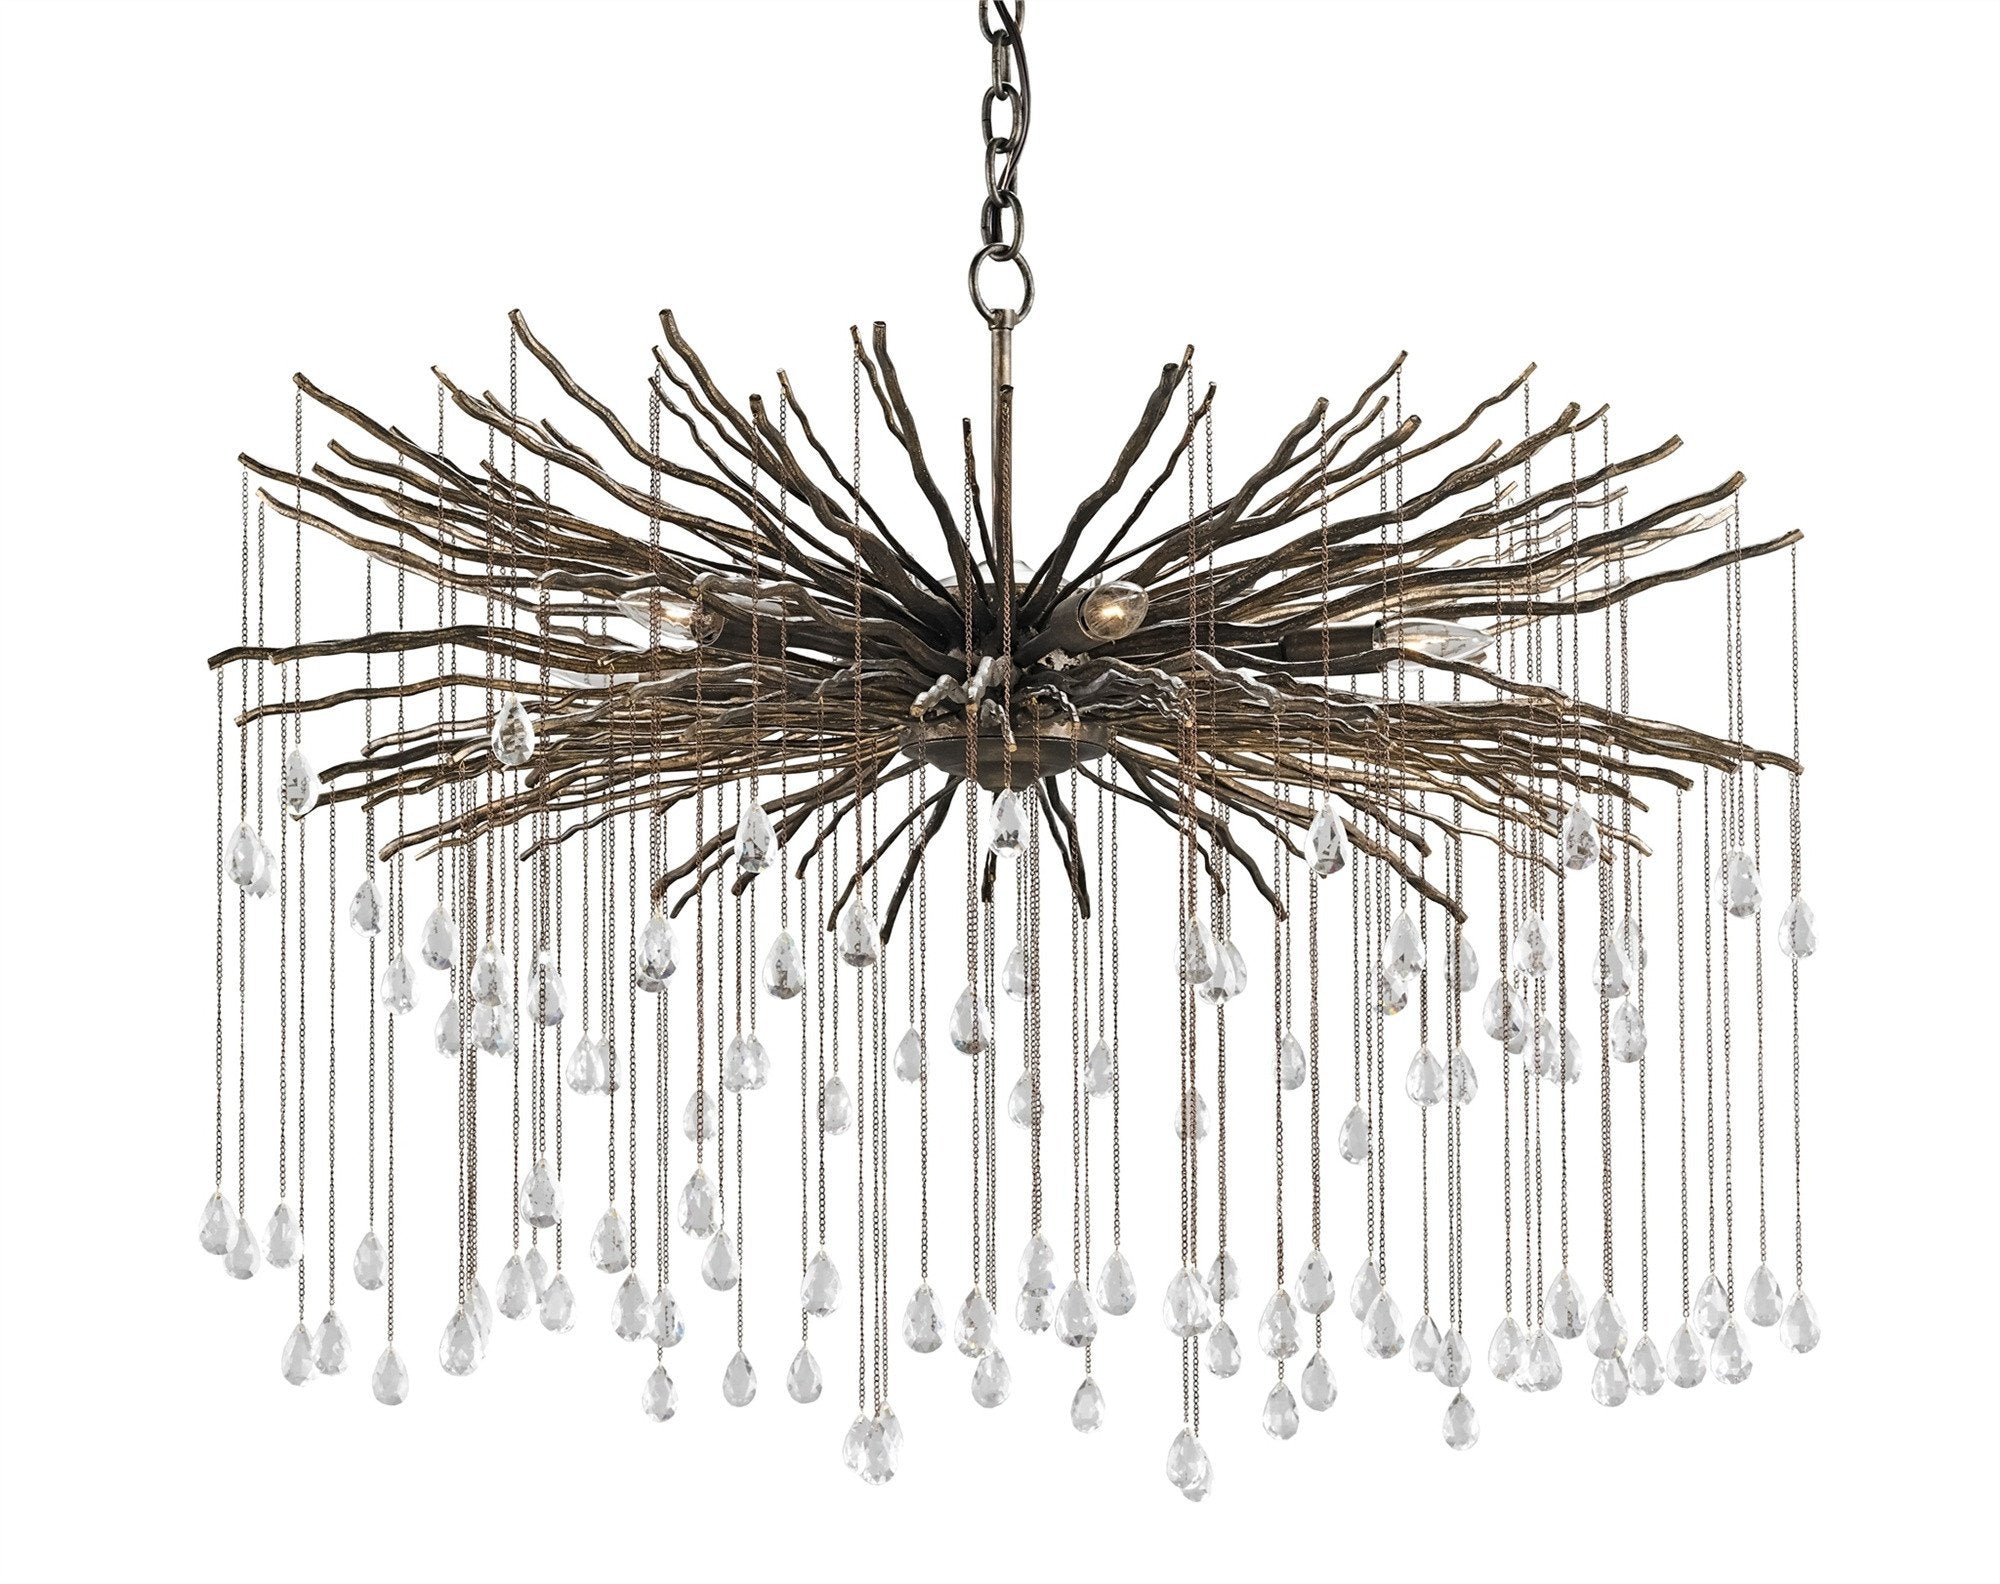 Fen Chandelier design by Currey and Company